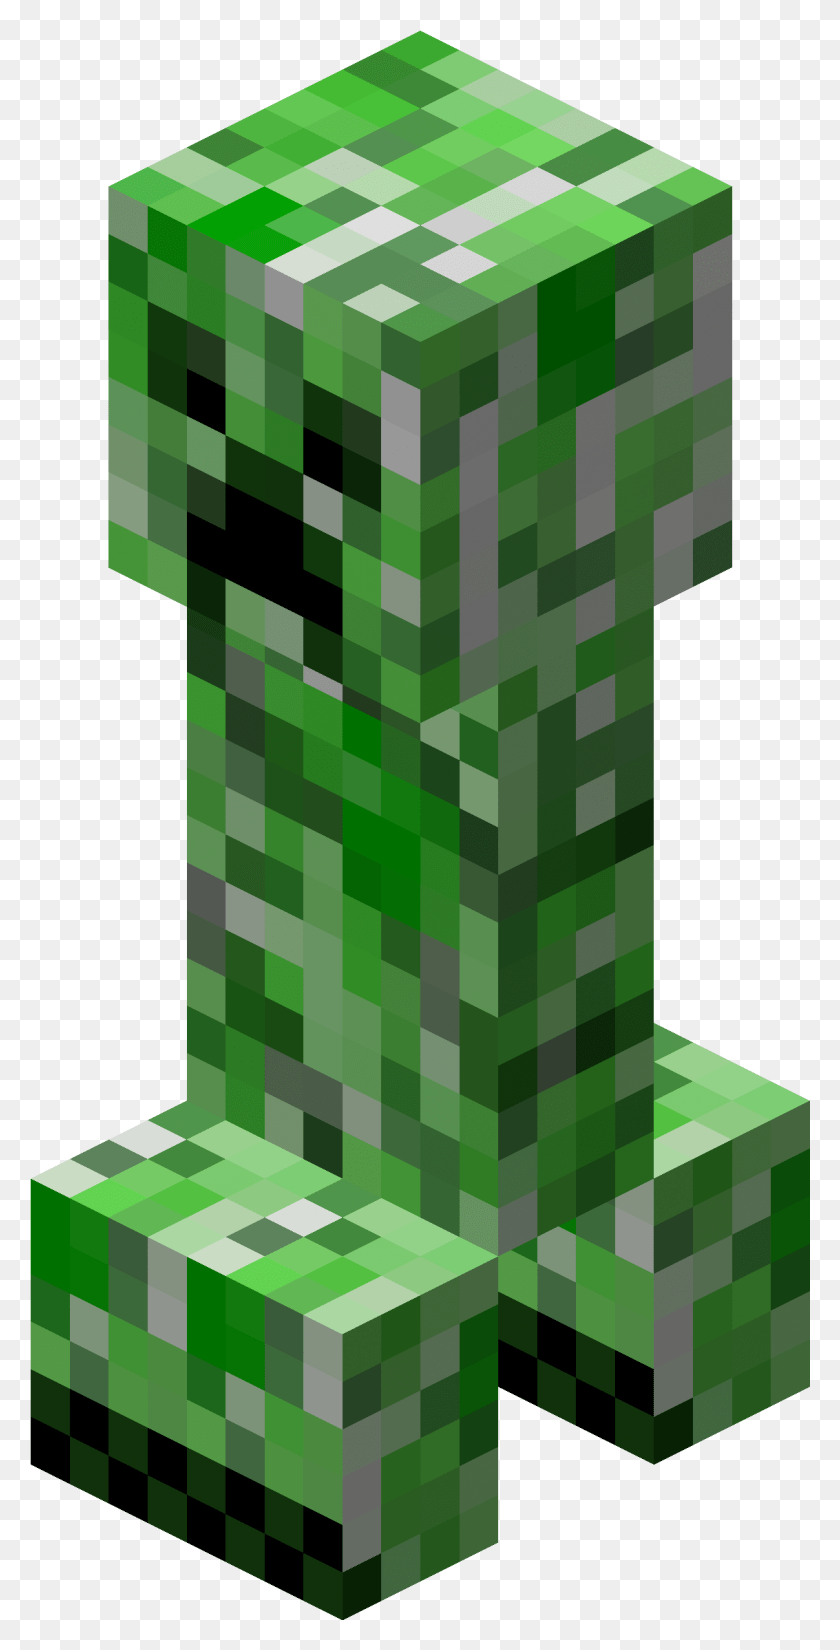 1133x2311 Minecraft Creeper Mob Video Game Skeleton Minecraft Creeper Transparent Background, Rug, Green, Tree HD PNG Download